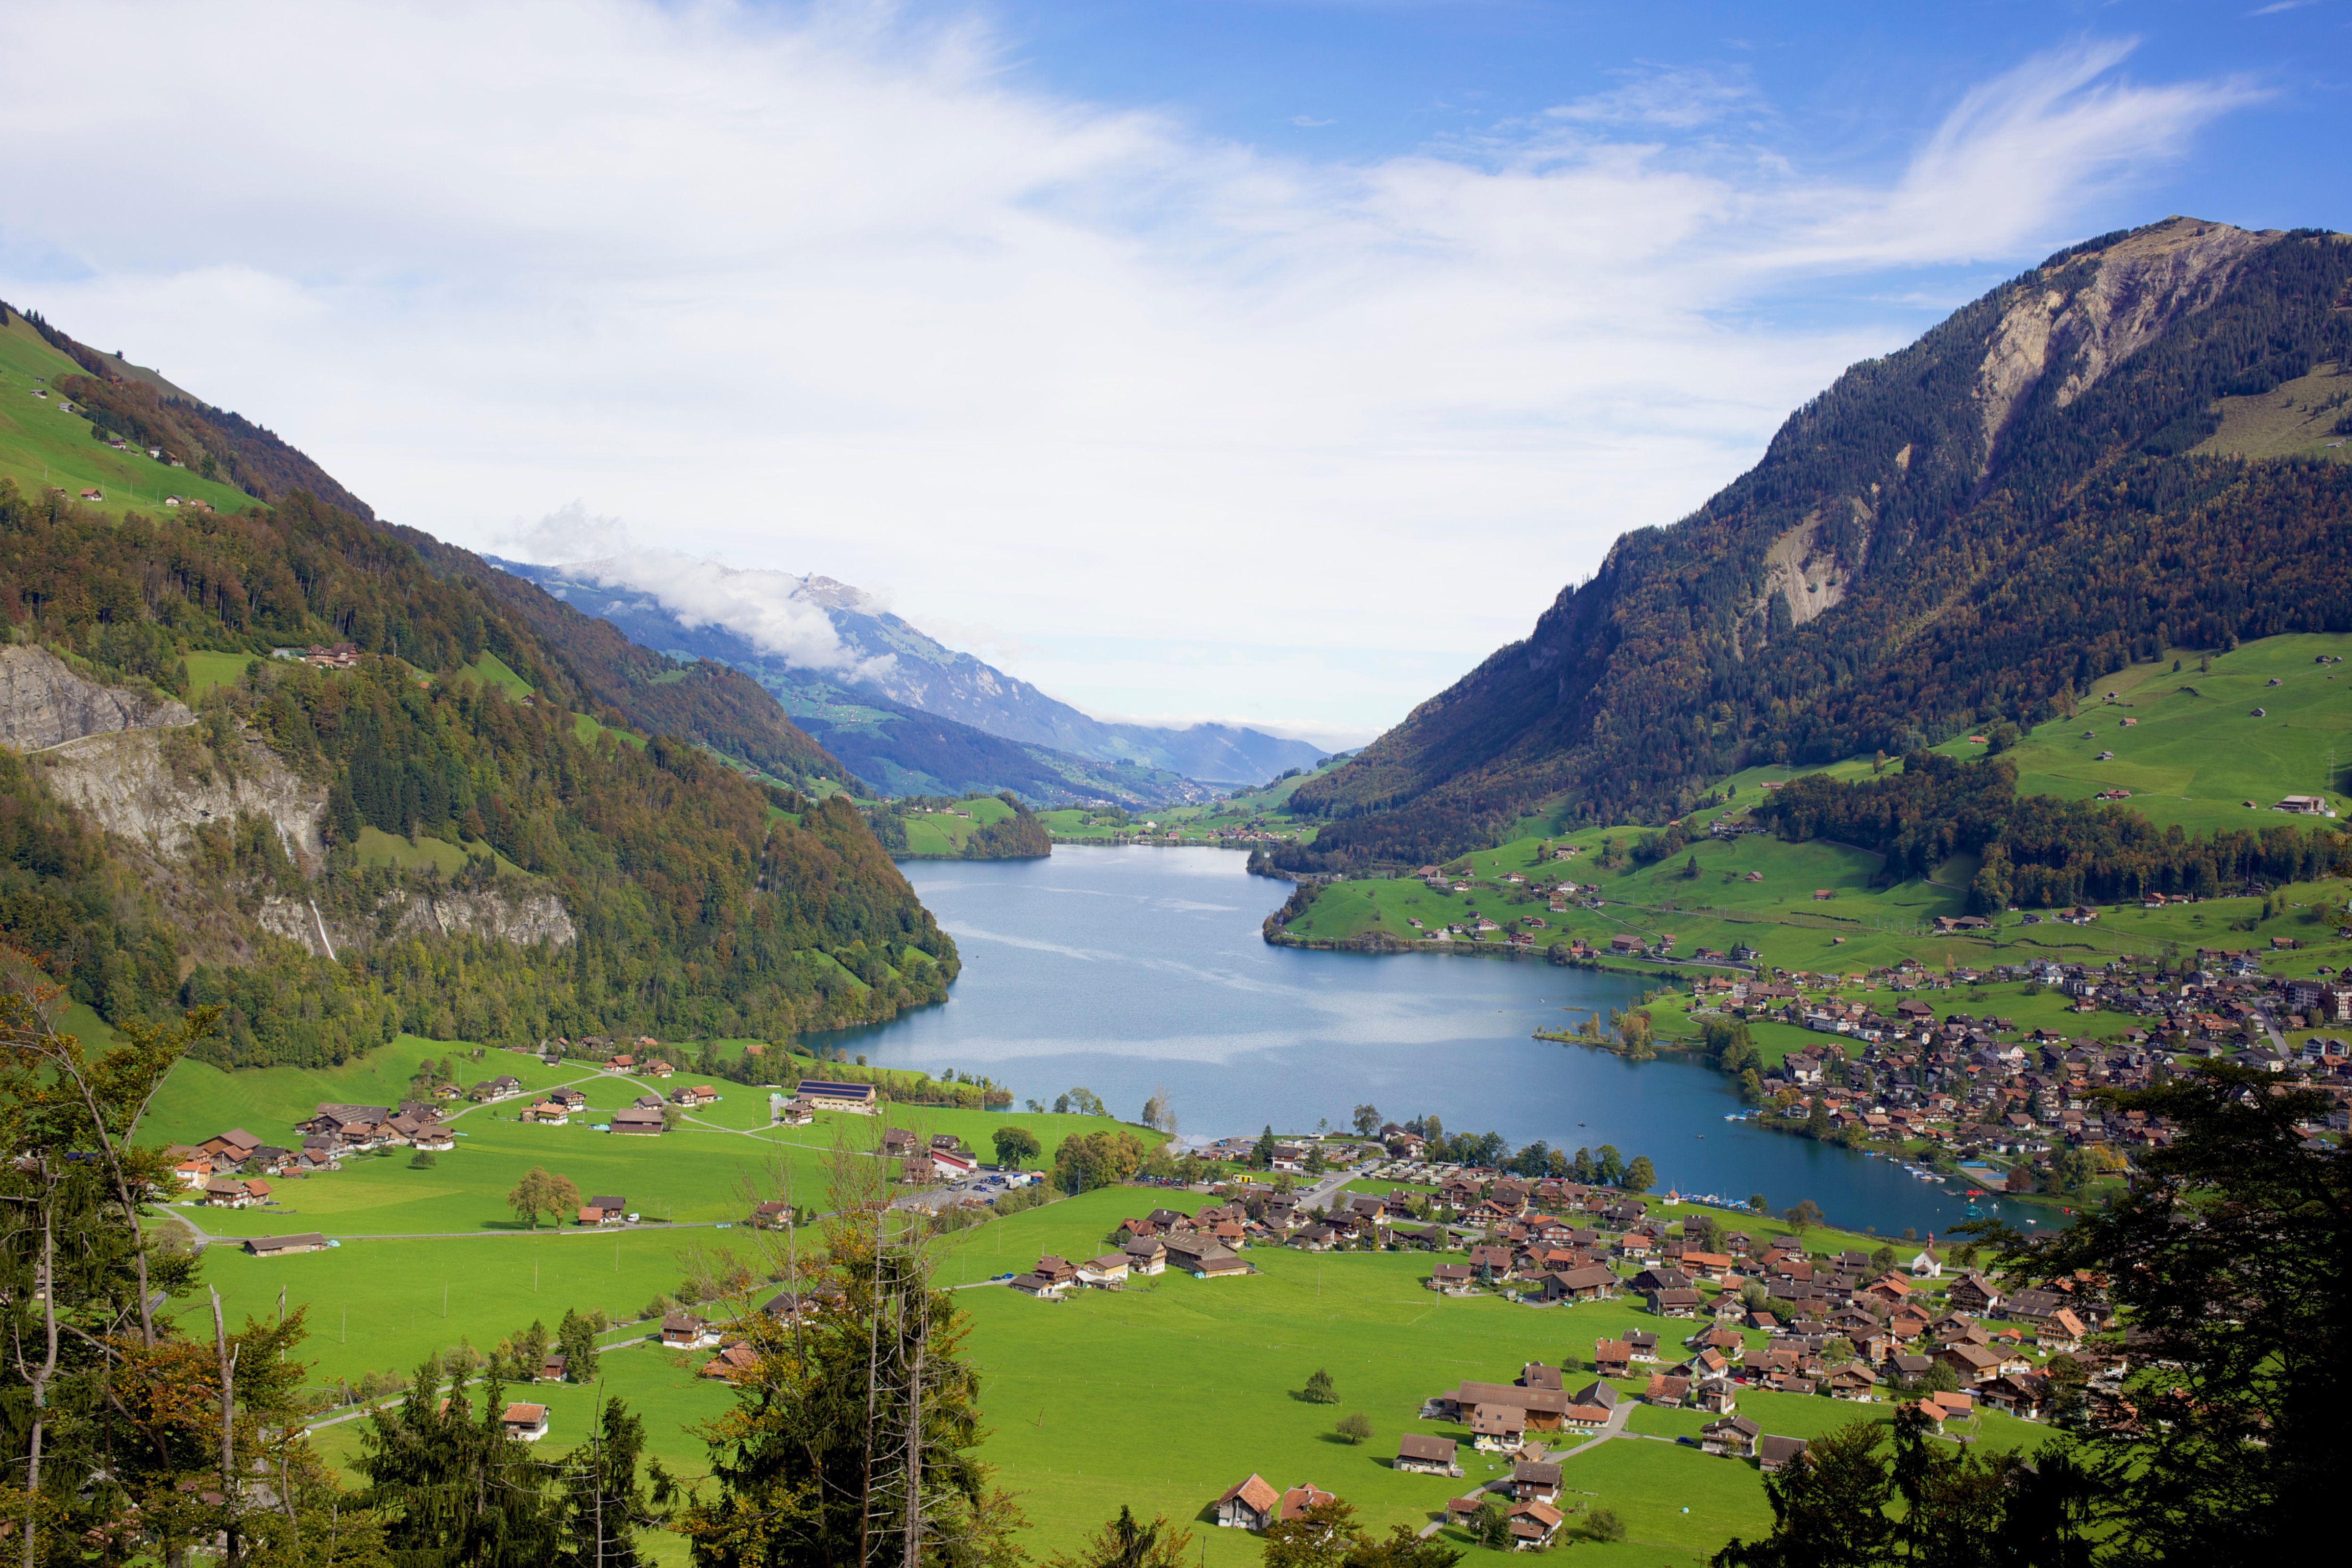 View of mountains and lakeside village, Switzerland (Dale Reubin—Getty Images/Cultura RF)